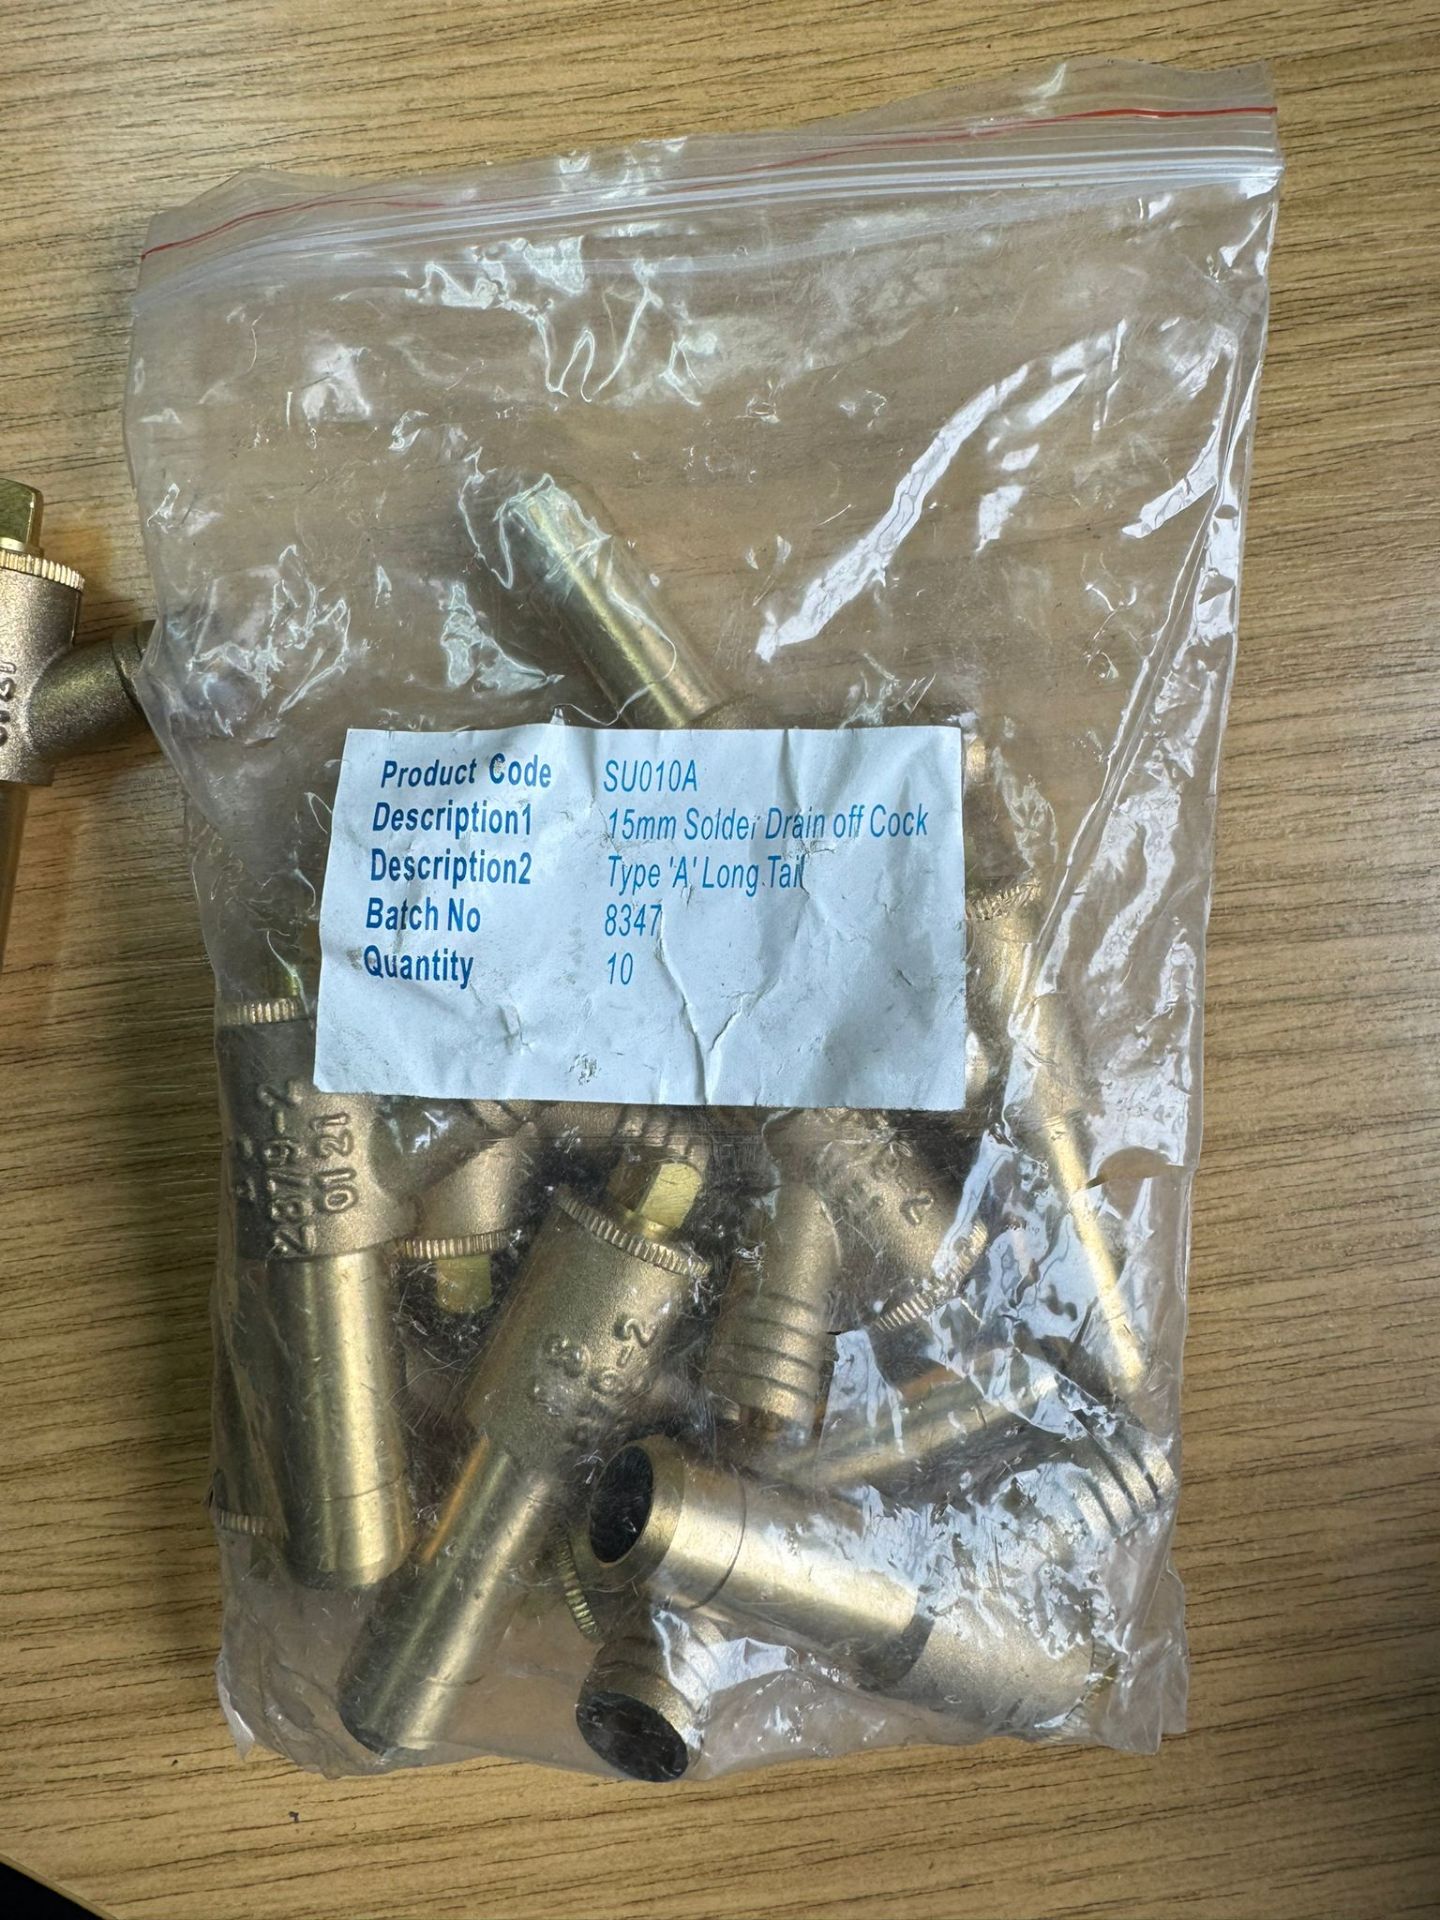 Bag of 10 long tail solder drain off cock - Image 2 of 6